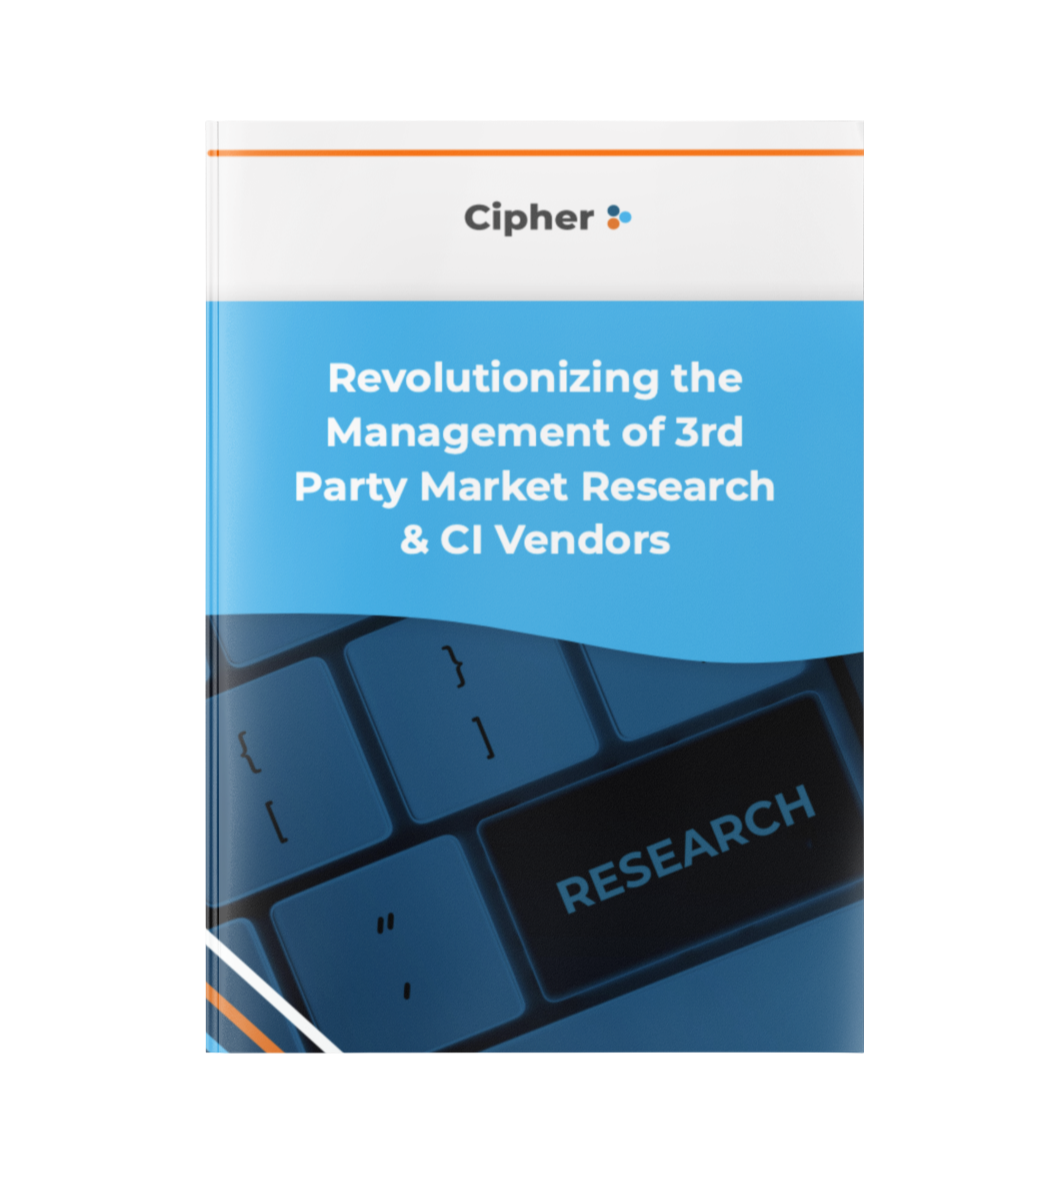 Revolutionizing the Management of Third-Party Market Research & CI Vendors